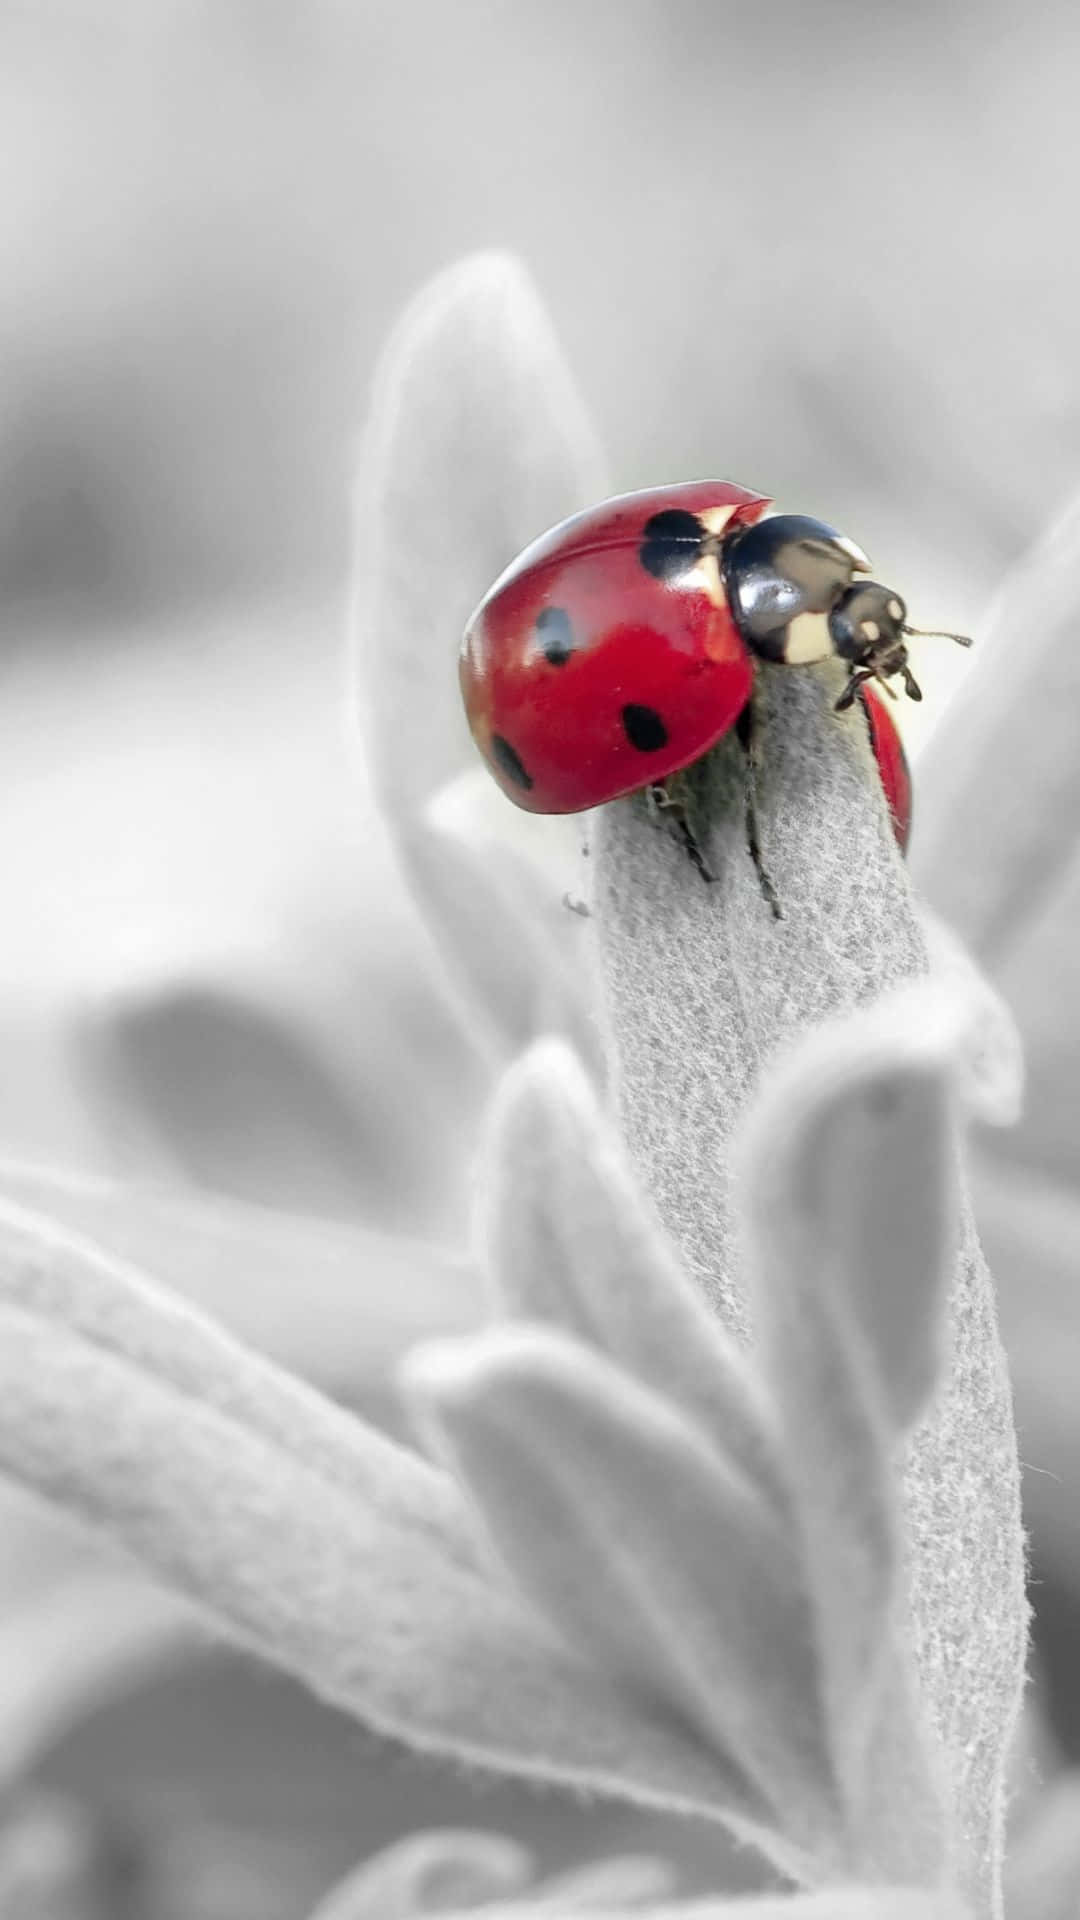 A Ladybug Is Sitting On A Plant In Black And White Wallpaper